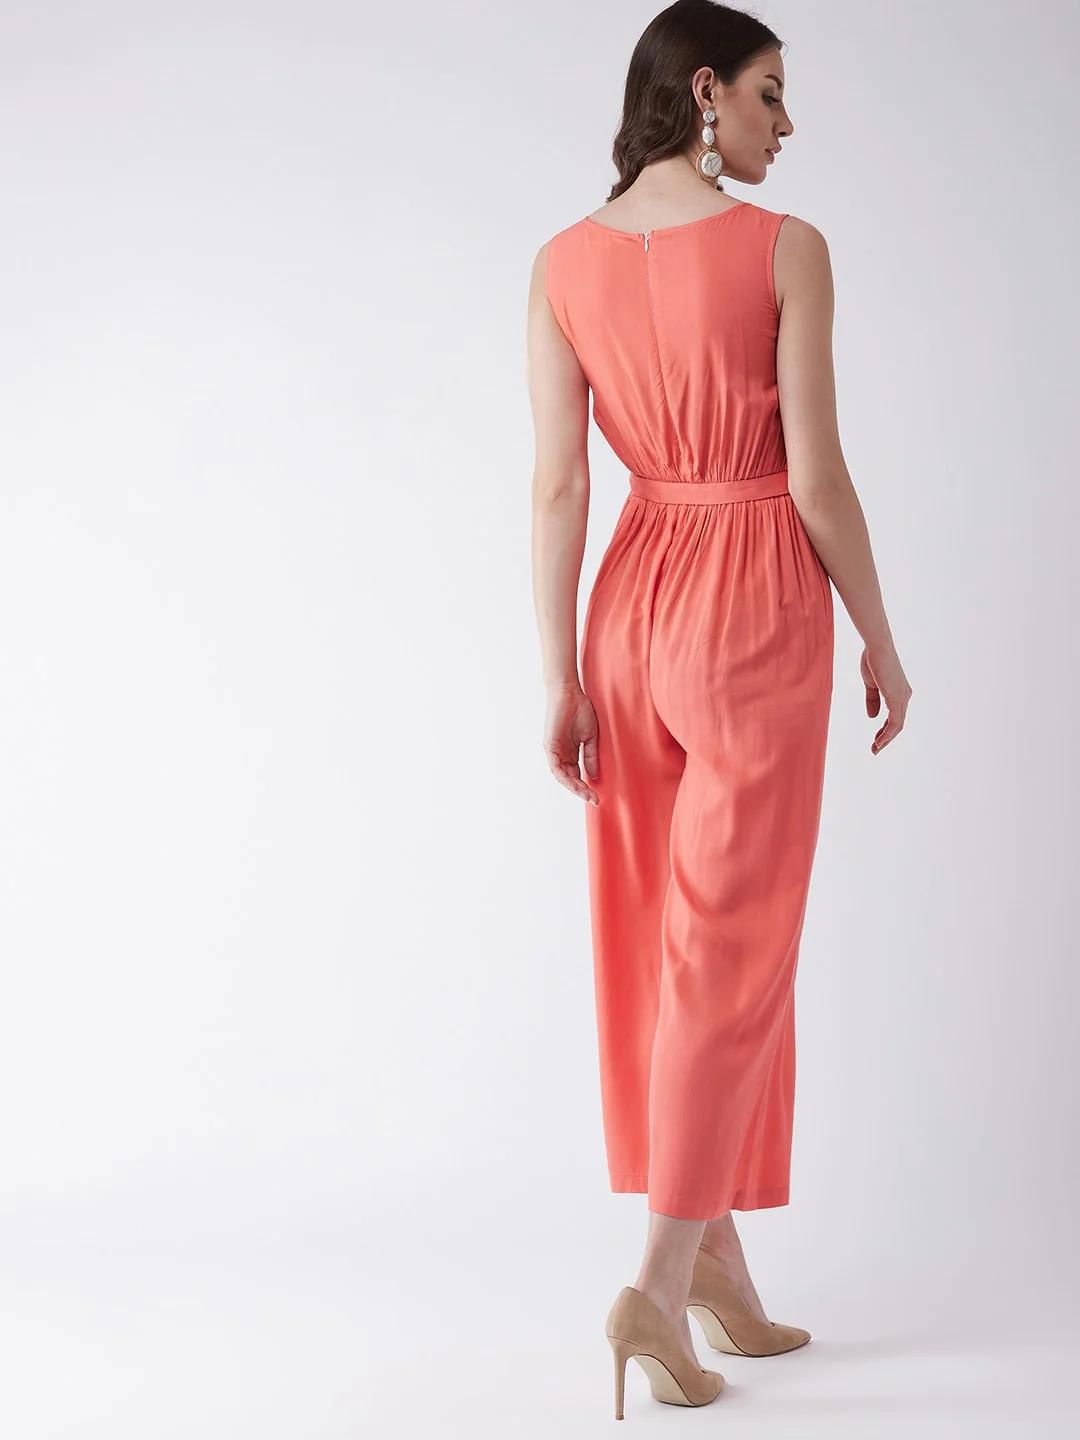 PANNKH Coral Embroidered Sleeveless Jumpsuit